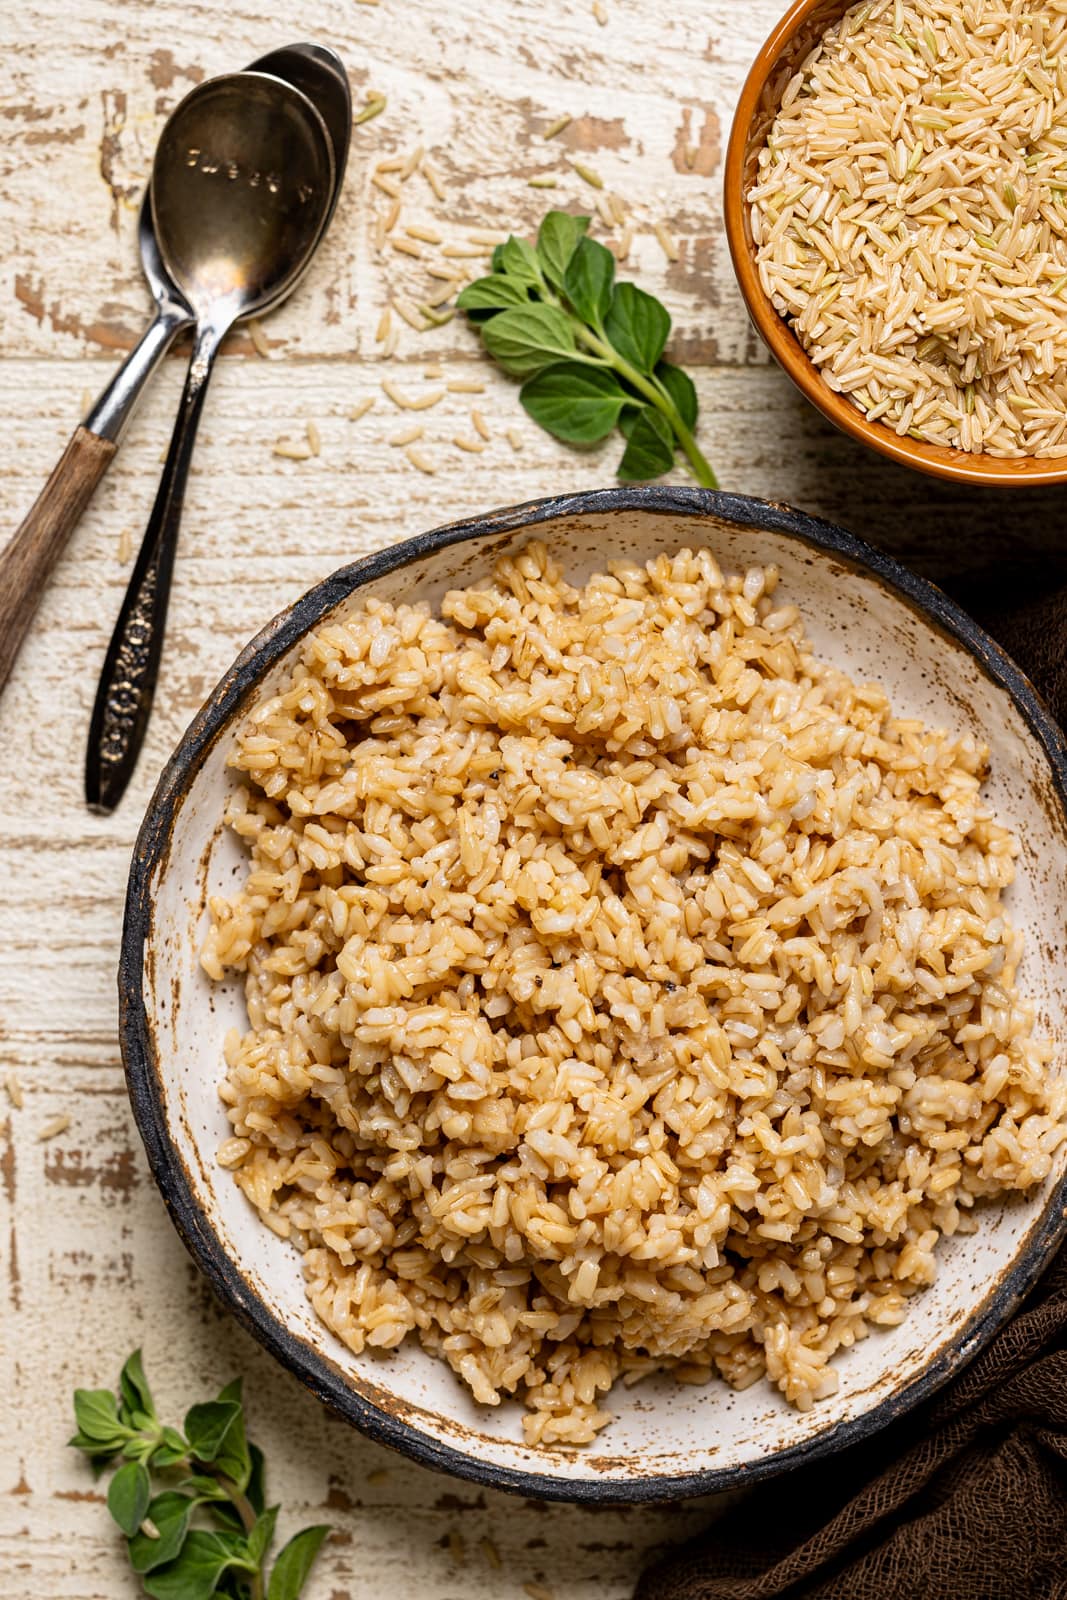 https://www.orchidsandsweettea.com/wp-content/uploads/2023/09/How-to-Cook-Brown-Rice-6.jpg